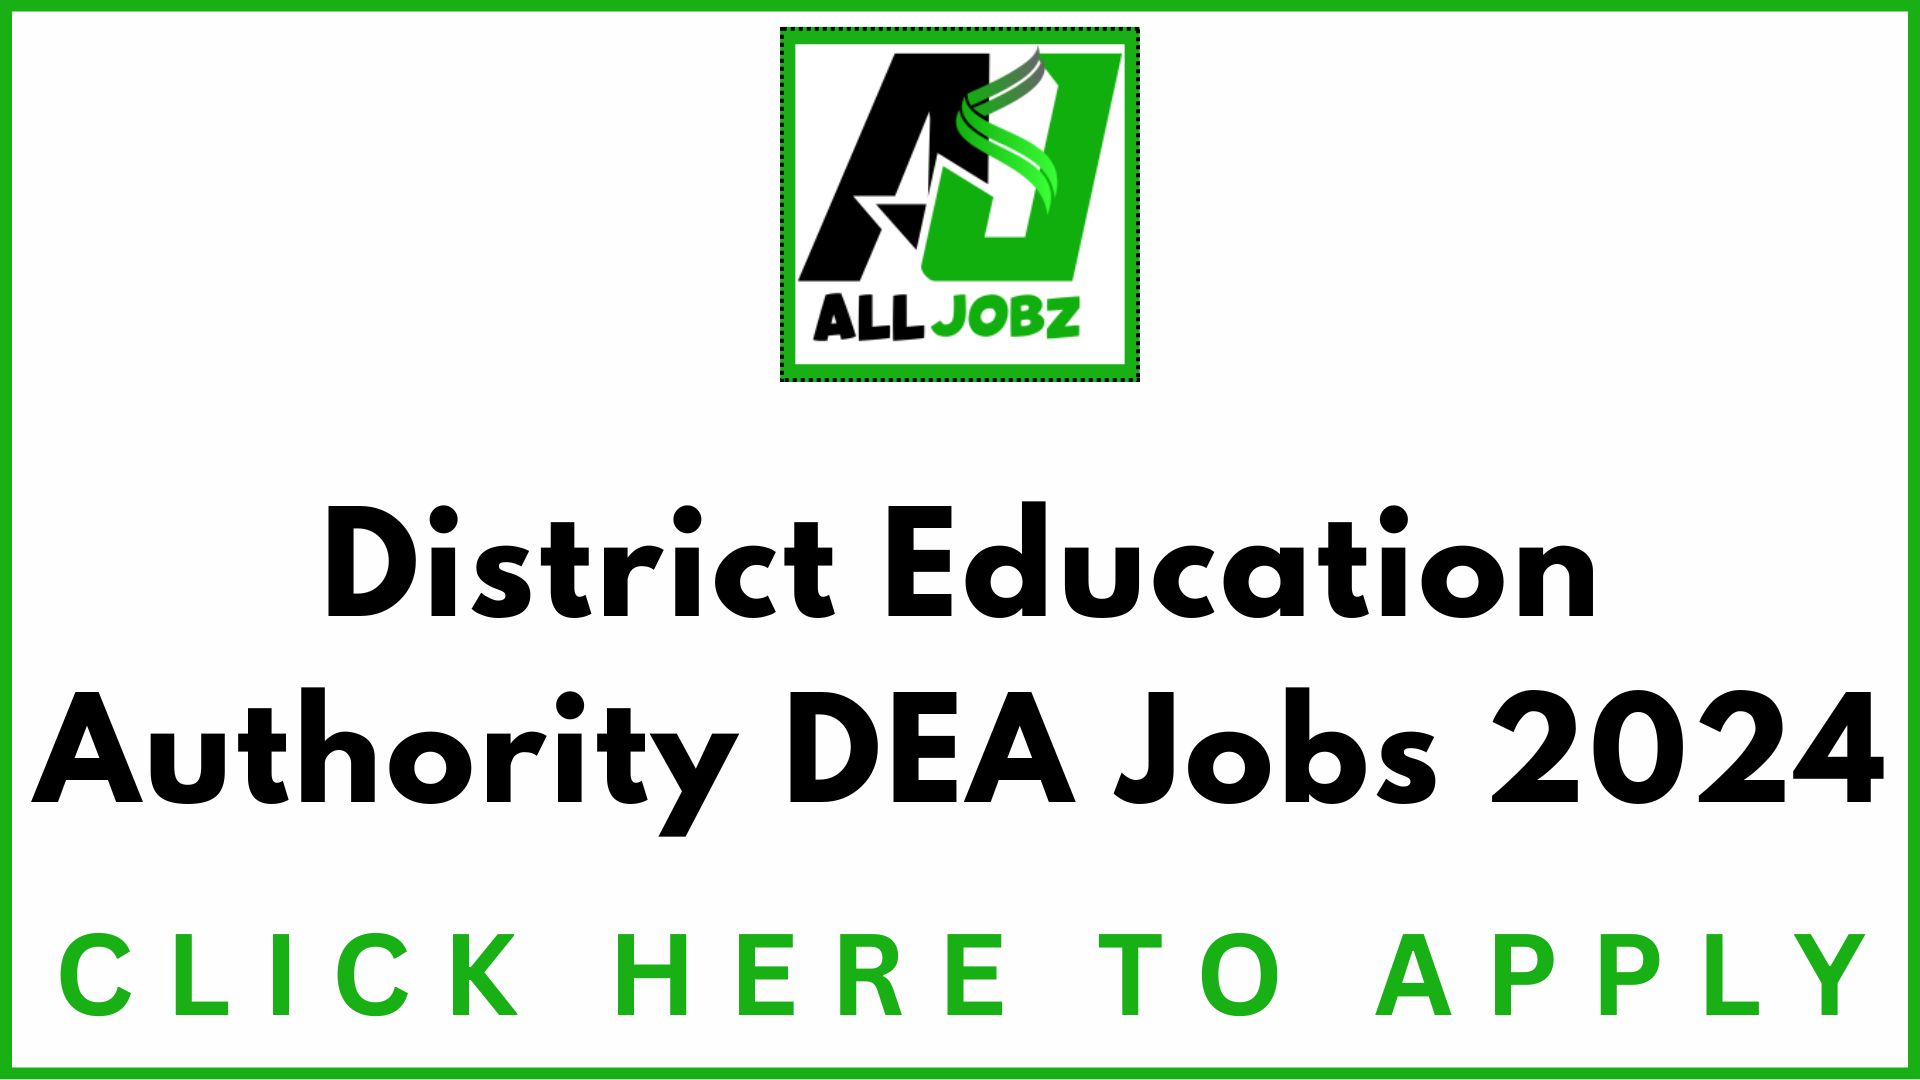 District Education Authority Dea Jobs Online Apply, District Education Authority Faisalabad Jobs, District Education Authority Lahore, Education Jobs Faisalabad, Paper Jobs Fsd, District Education Authority Sheikhupura Jobs 2024 Online Apply, Private School Jobs In Sheikhupura, Female Jobs In Sheikhupura, Education Jobs Sheikhupura, District Education Officer Contact Number,